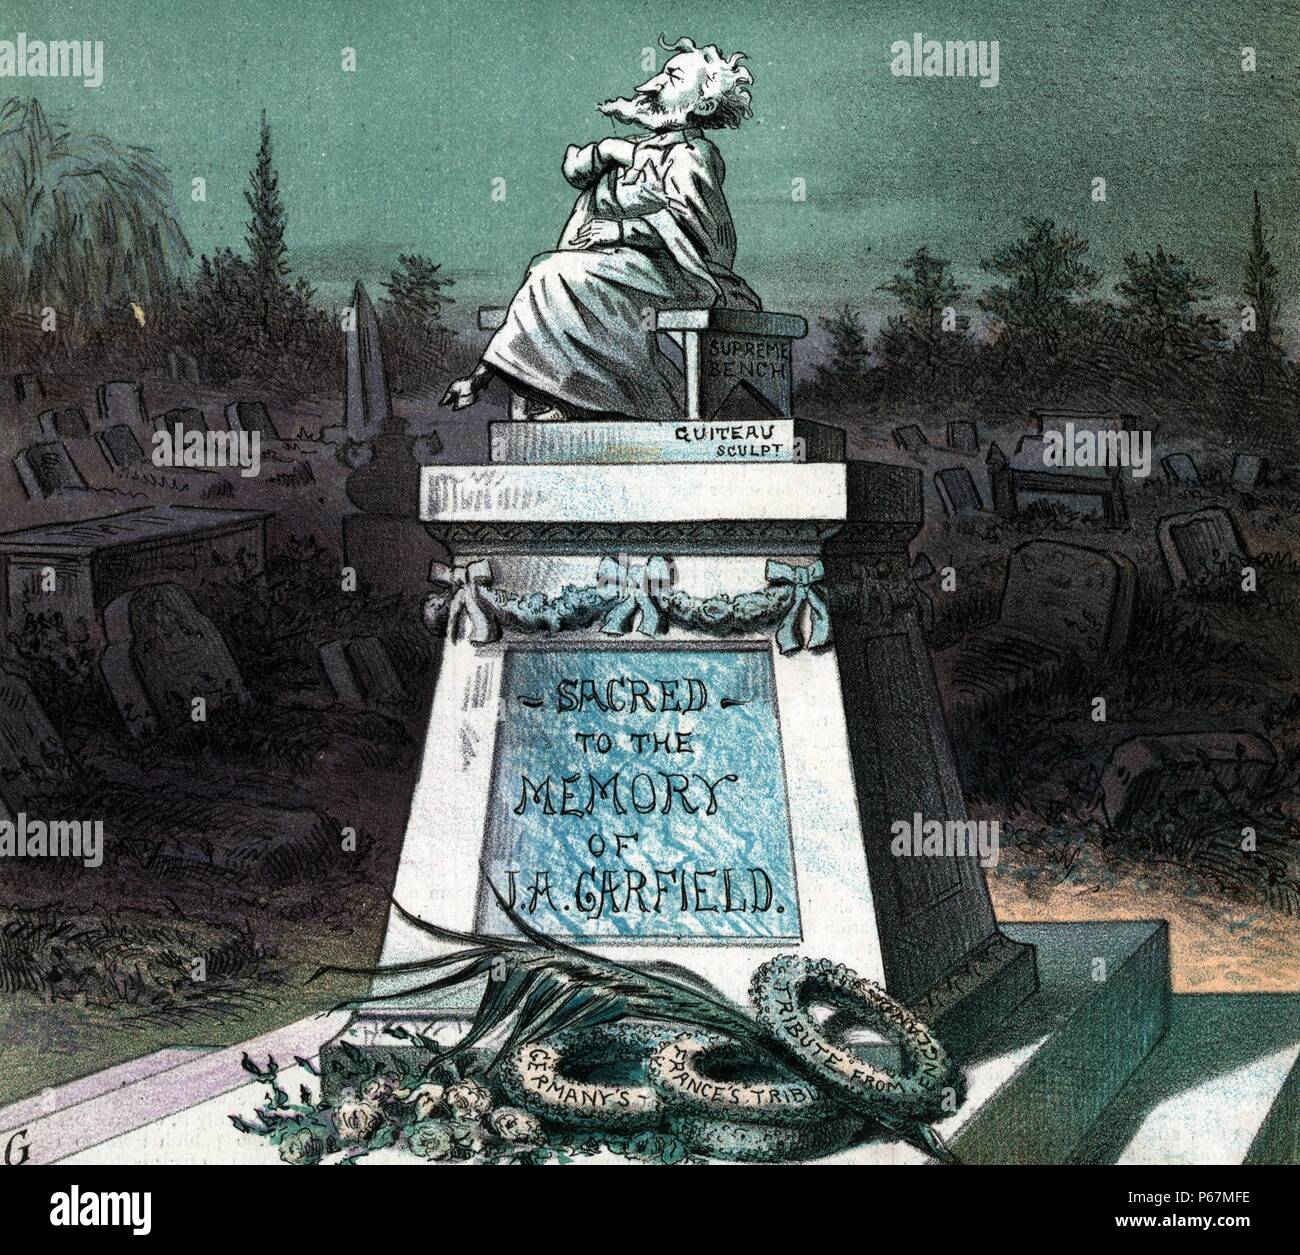 The living president's tribute to the dead president' Statue of Roscoe Conkling, with cloven hooves, seated on a bench labelled 'Supreme Bench' atop a monumental tomb labelled 'Sacred to the Memory of J.A. Garfield'; the monument is signed 'Guiteau sculpt.' Stock Photo